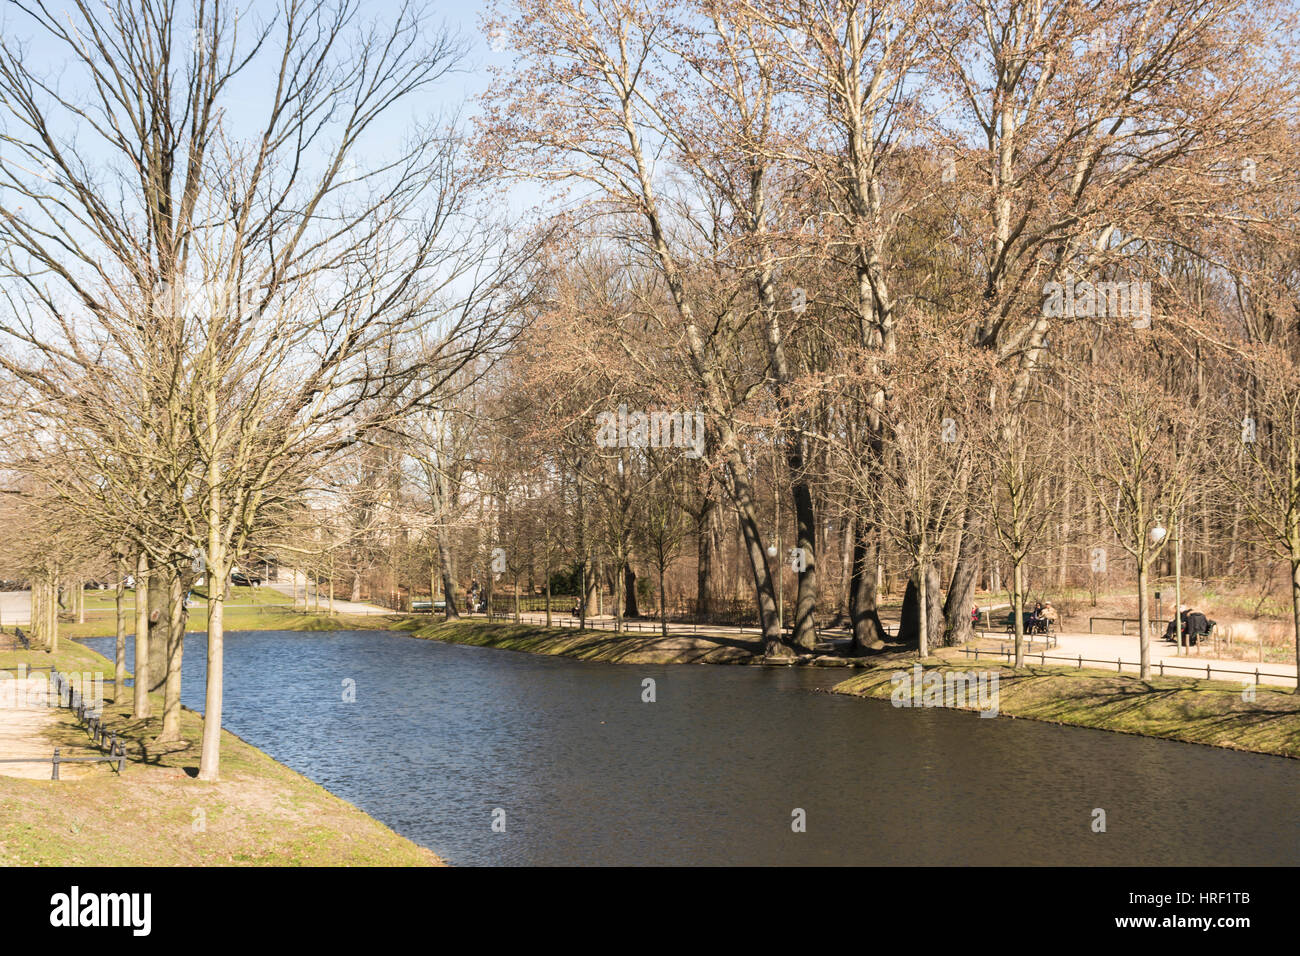 Lake and trees in the Tiergarten park, Berlin, Germany Stock Photo